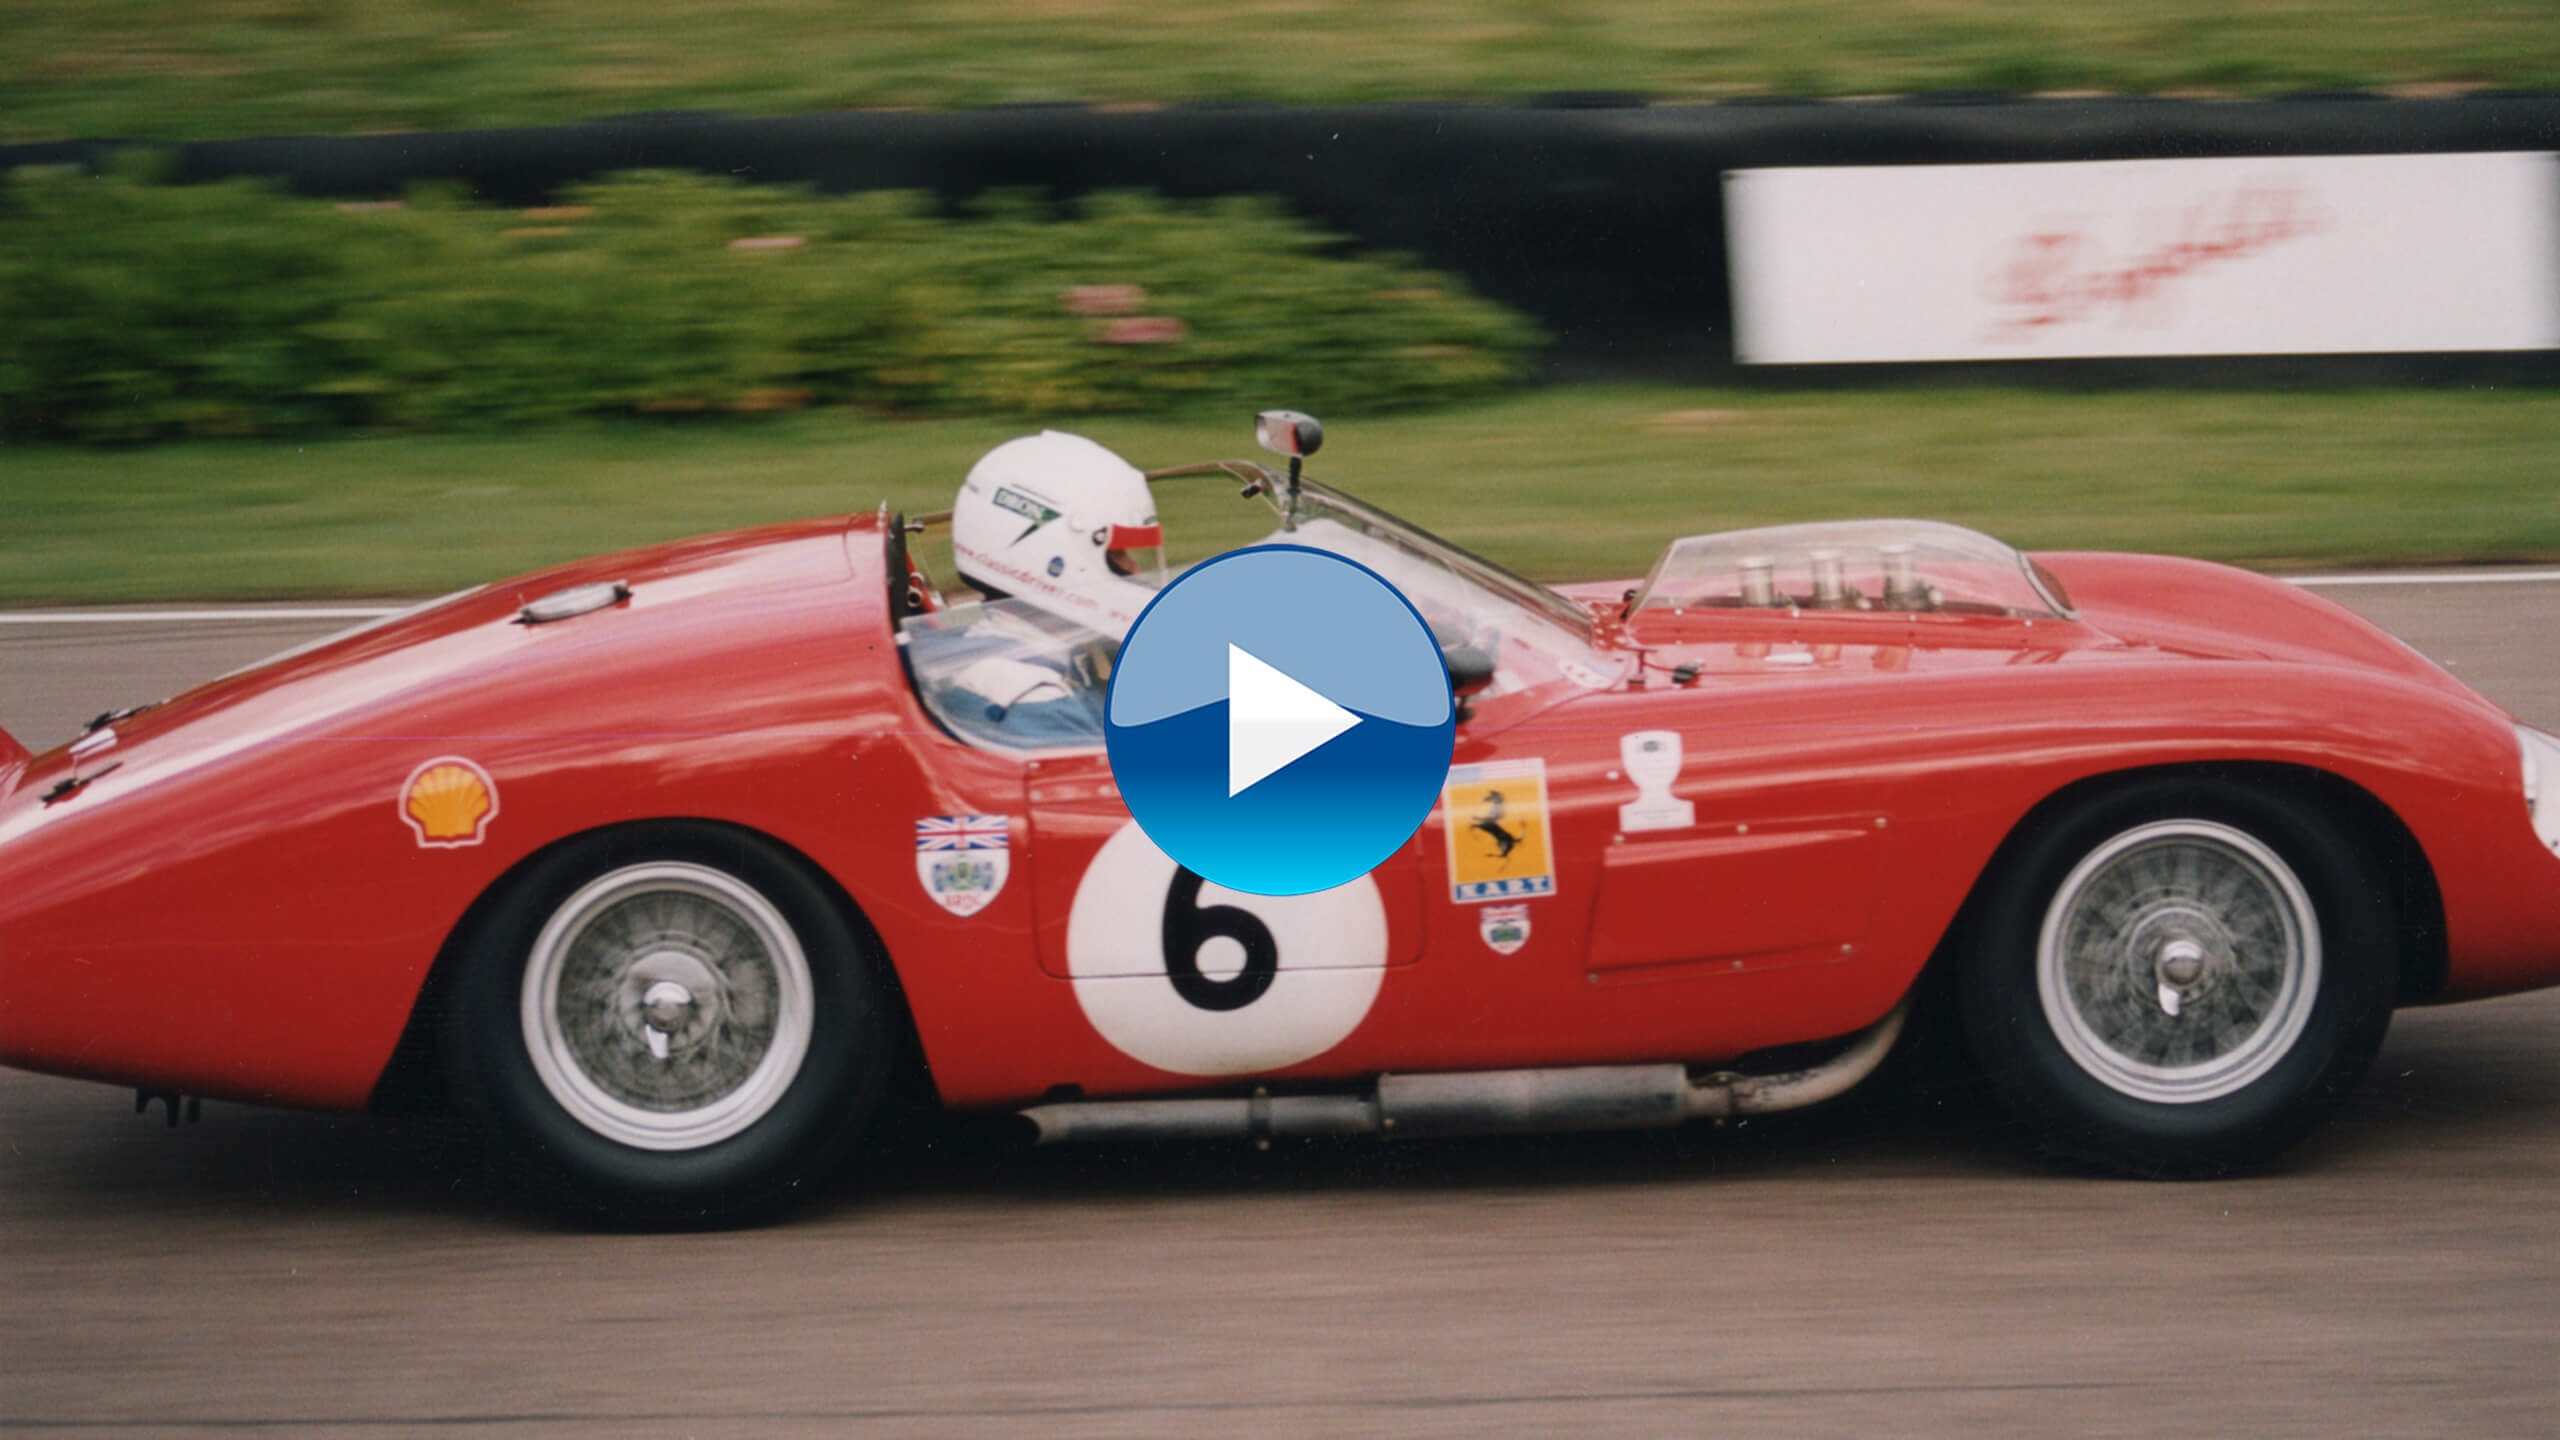 Video: Tony Dron drives the Ferrari Dino 246S to victory at Goodwood